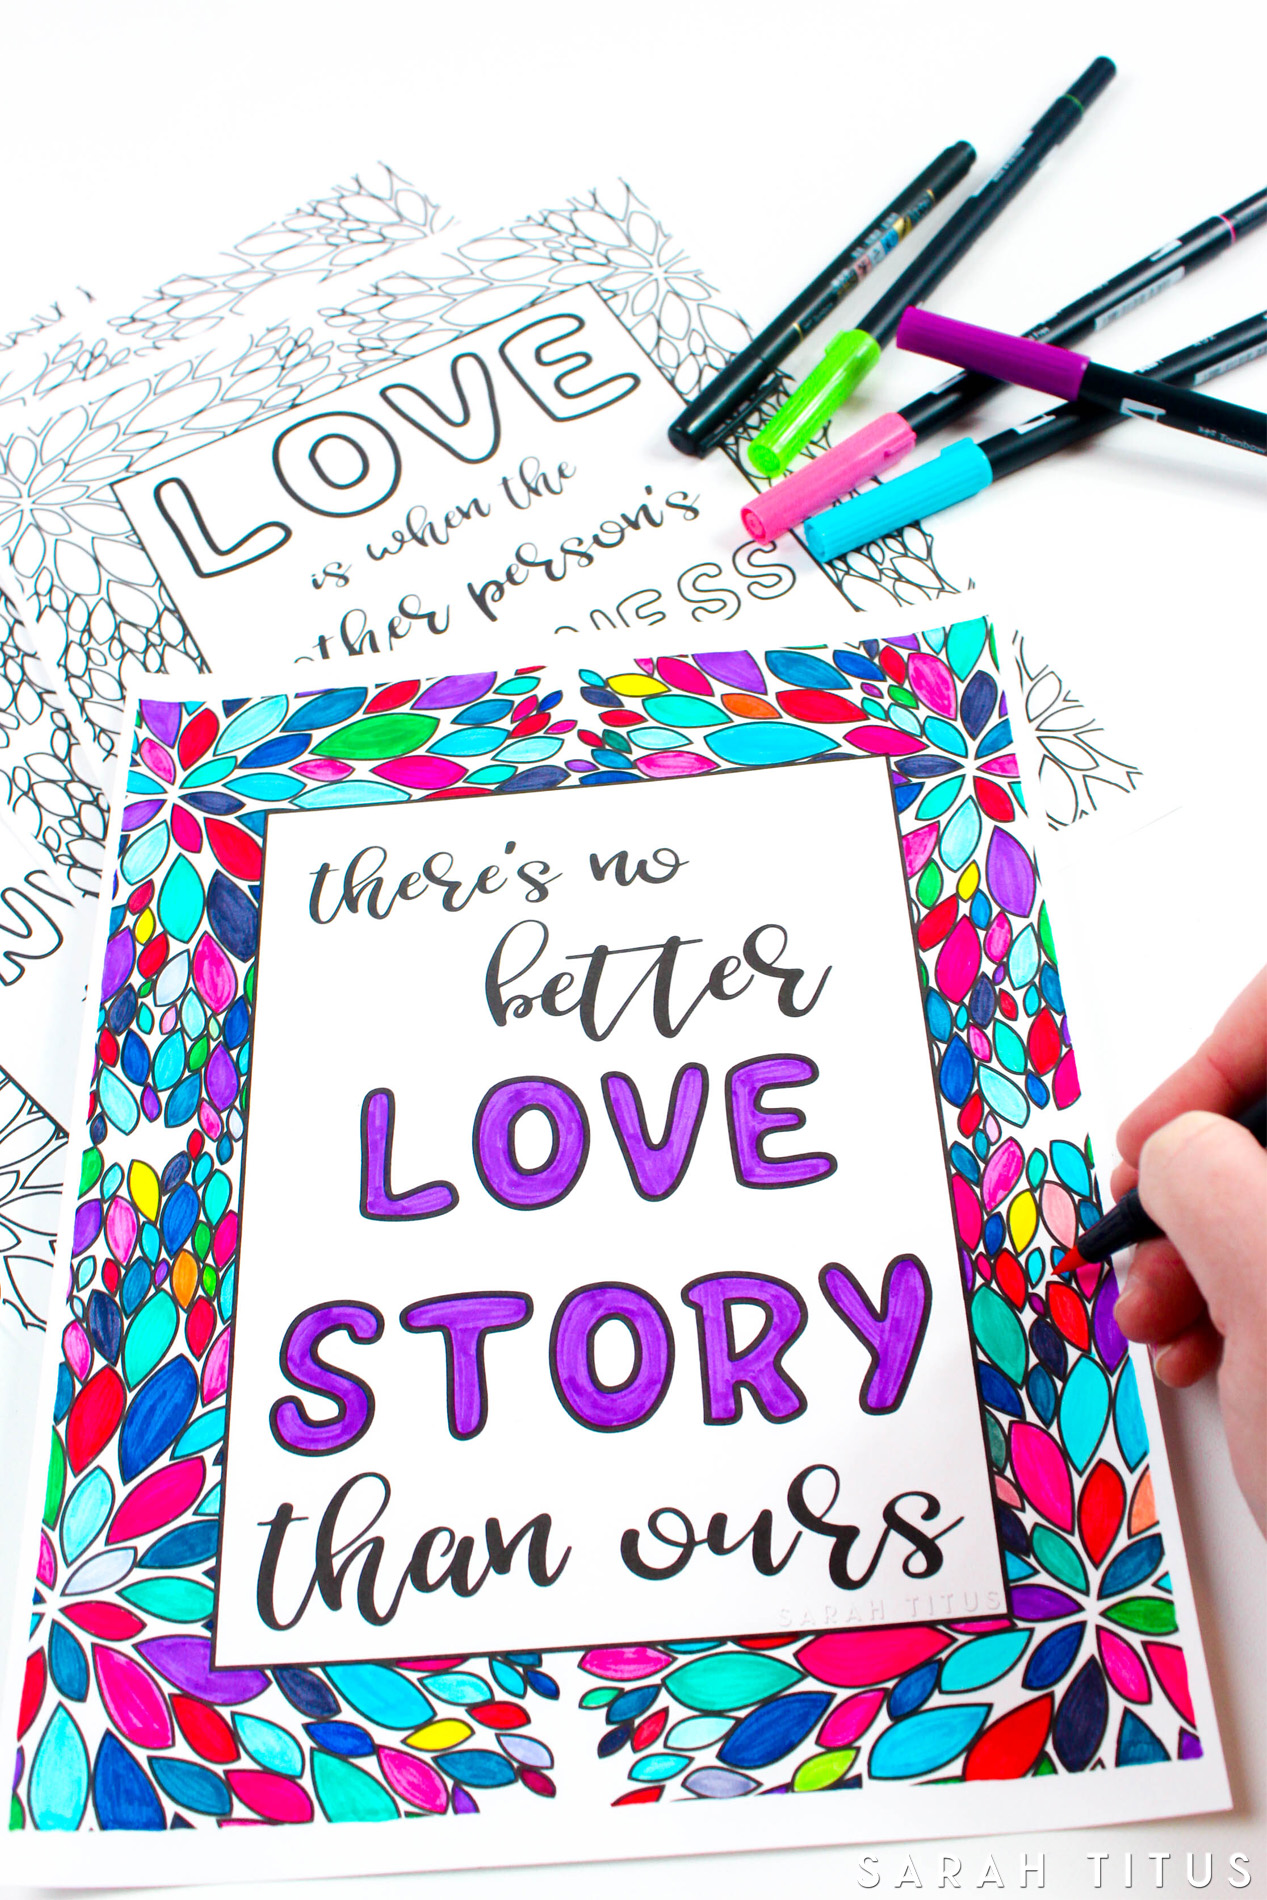 This Free Printable Love Quotes Coloring Sheets is out of this world, print these quotes for you and your kids. Meditate on them, and find ways you all can be more loving to each other!